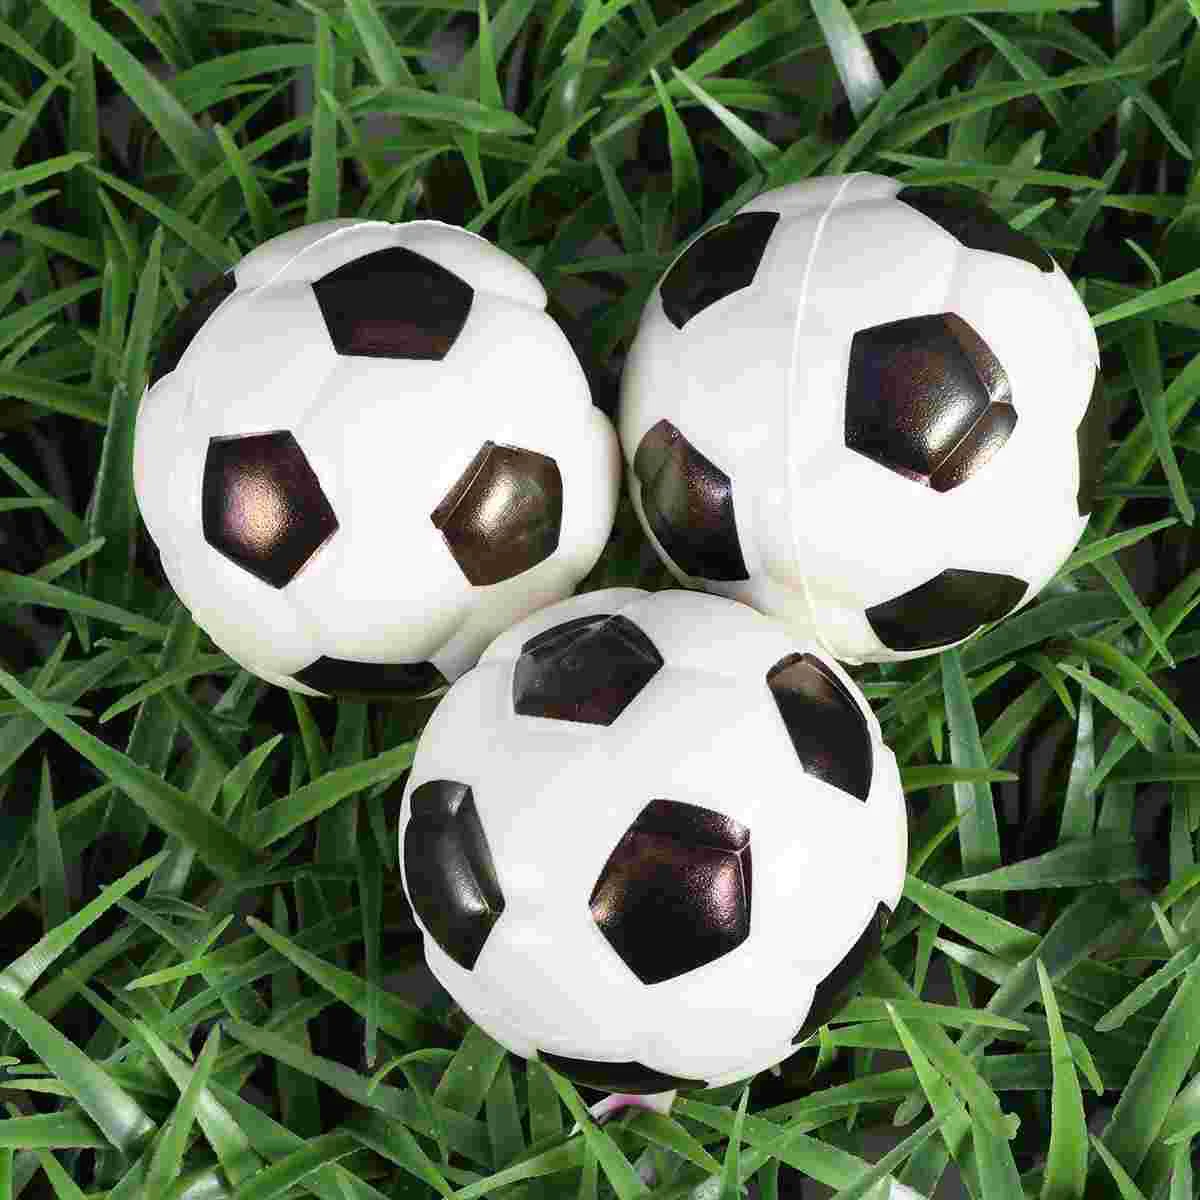 

4pcs Creative Mini Soccer Interesting Small Football Funny Toys Playthings for Kids Children Toddlers Balls